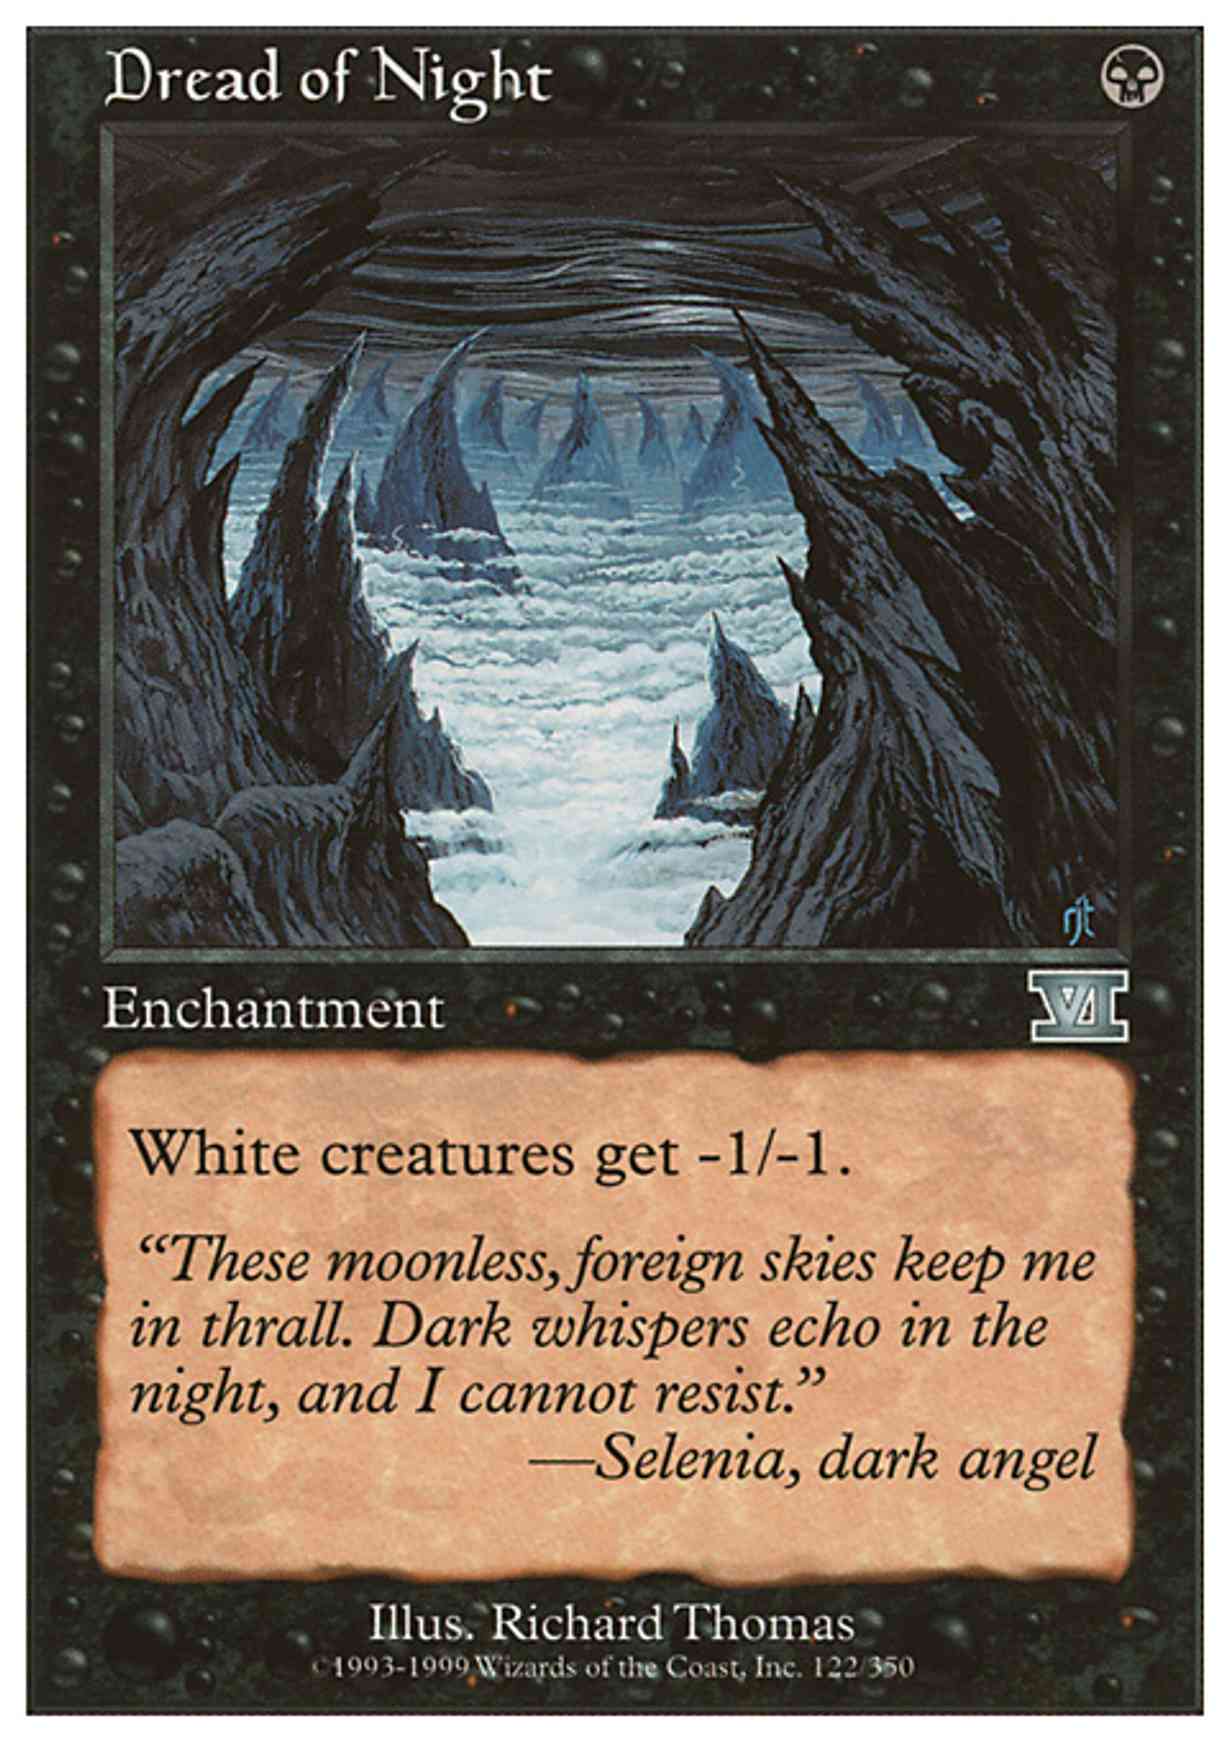 Dread of Night magic card front